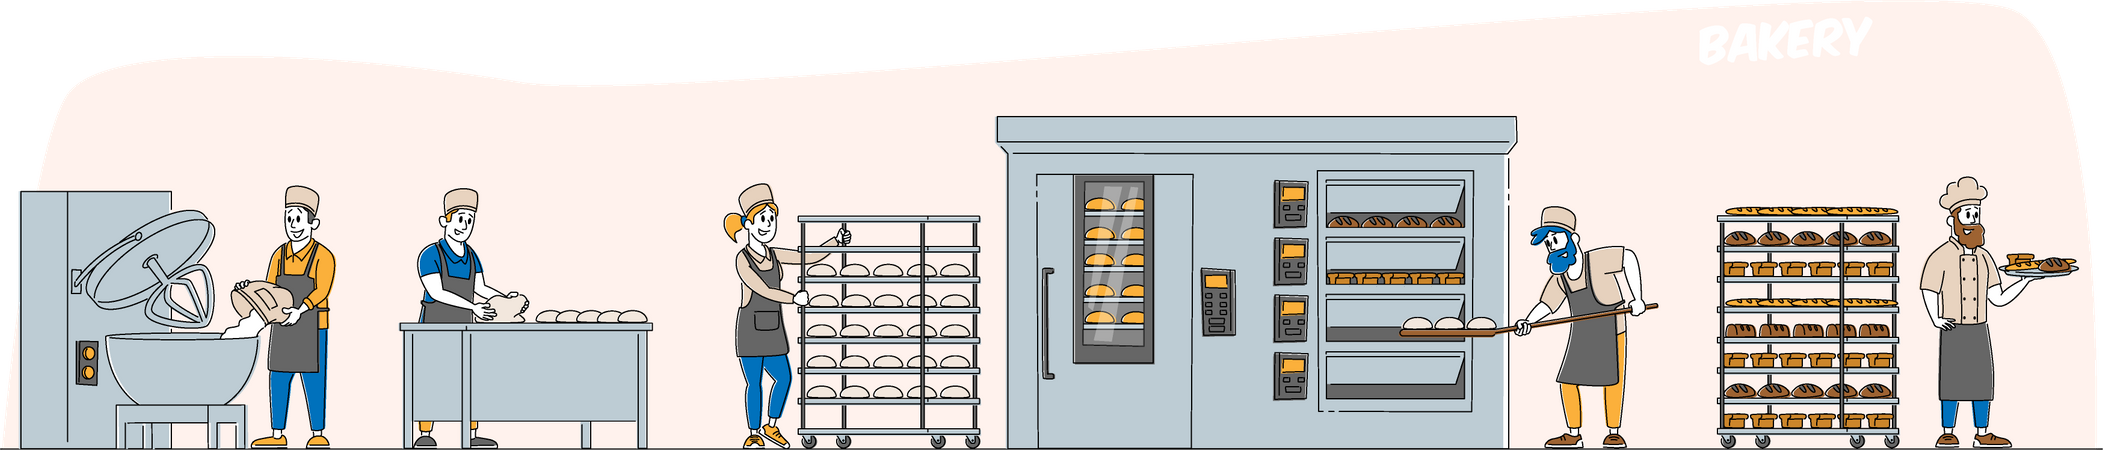 Bakery and Bread Machinery Production  Illustration